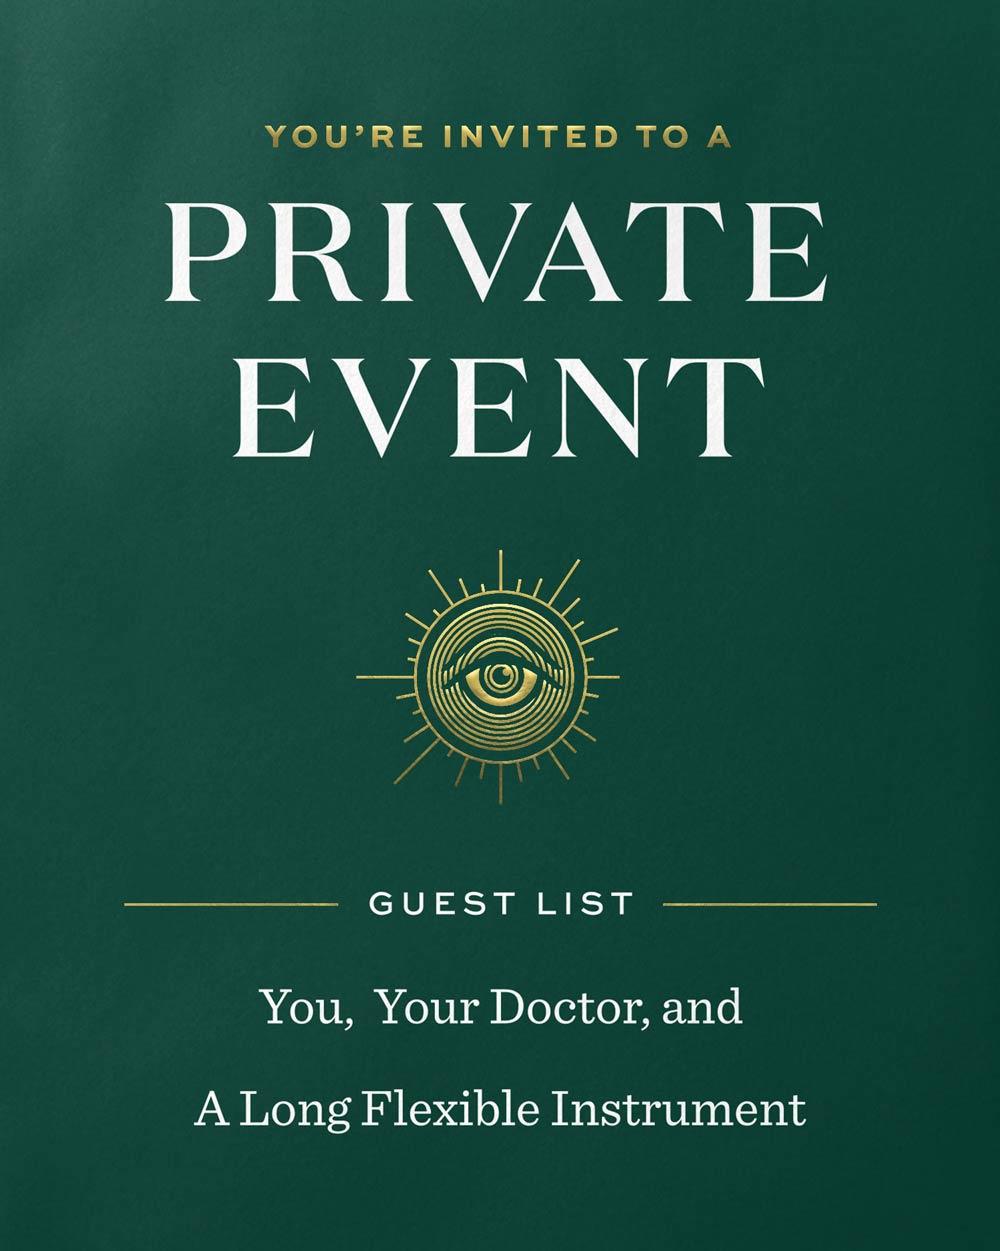 You're invited to a private event. Guest list: You, You Doctor, and A Long Flexible Instrument.